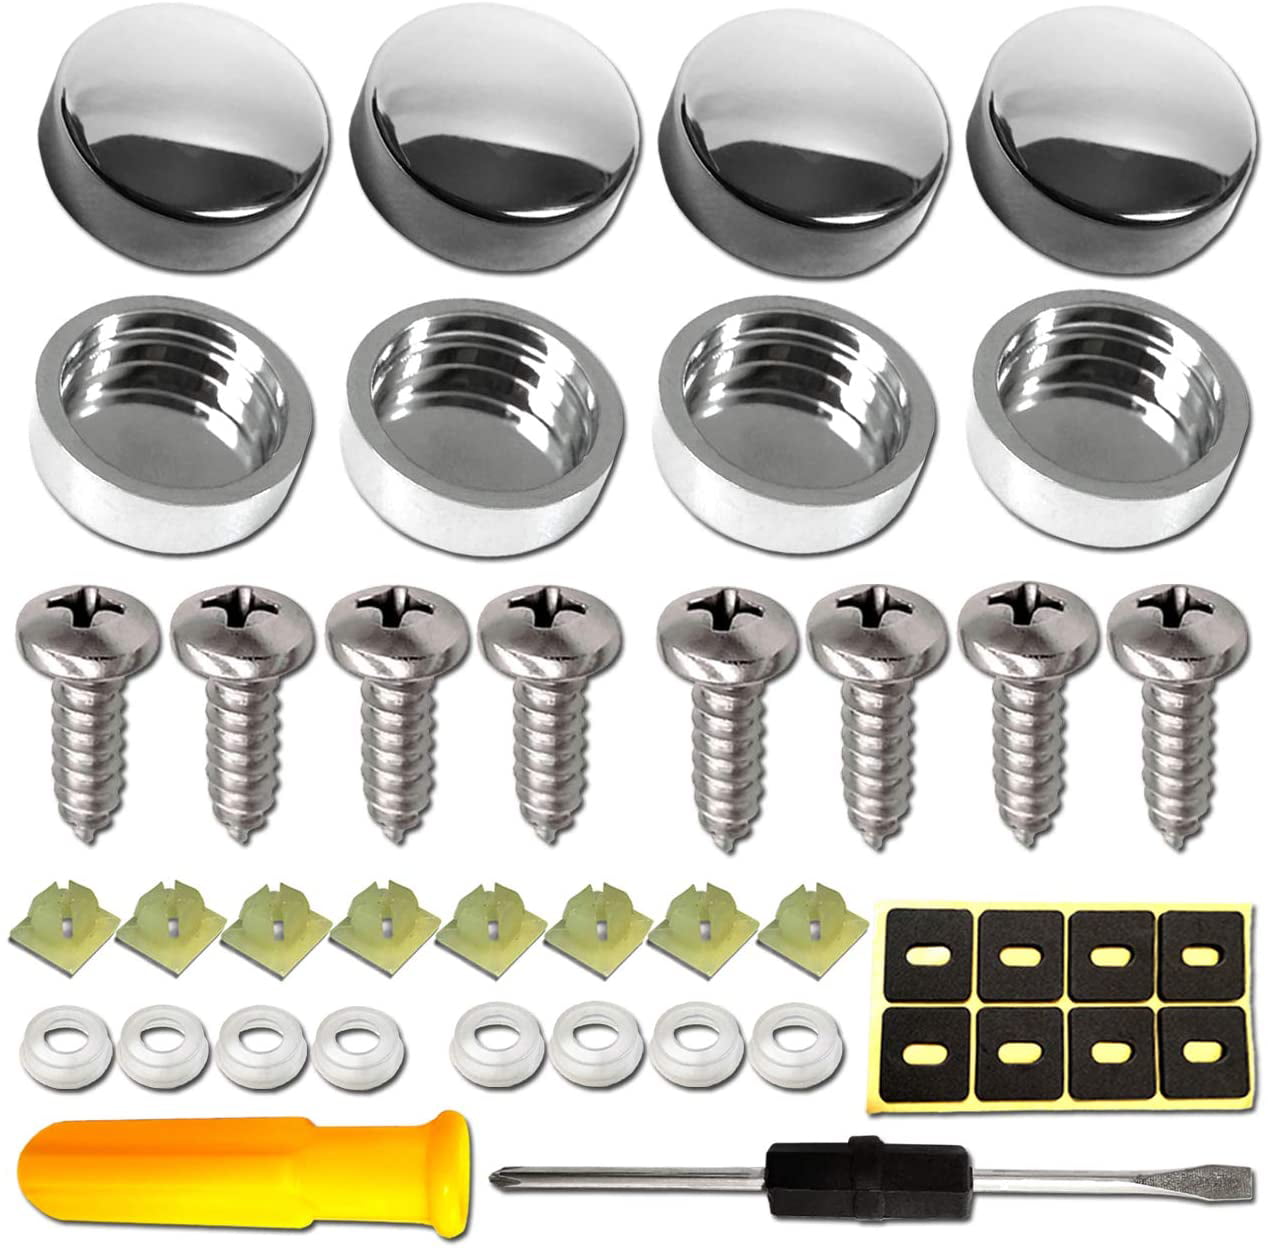 Chrome Teeth Motorcycle License Plate Tag Frame Kit Stainless Screws & Snap Caps 